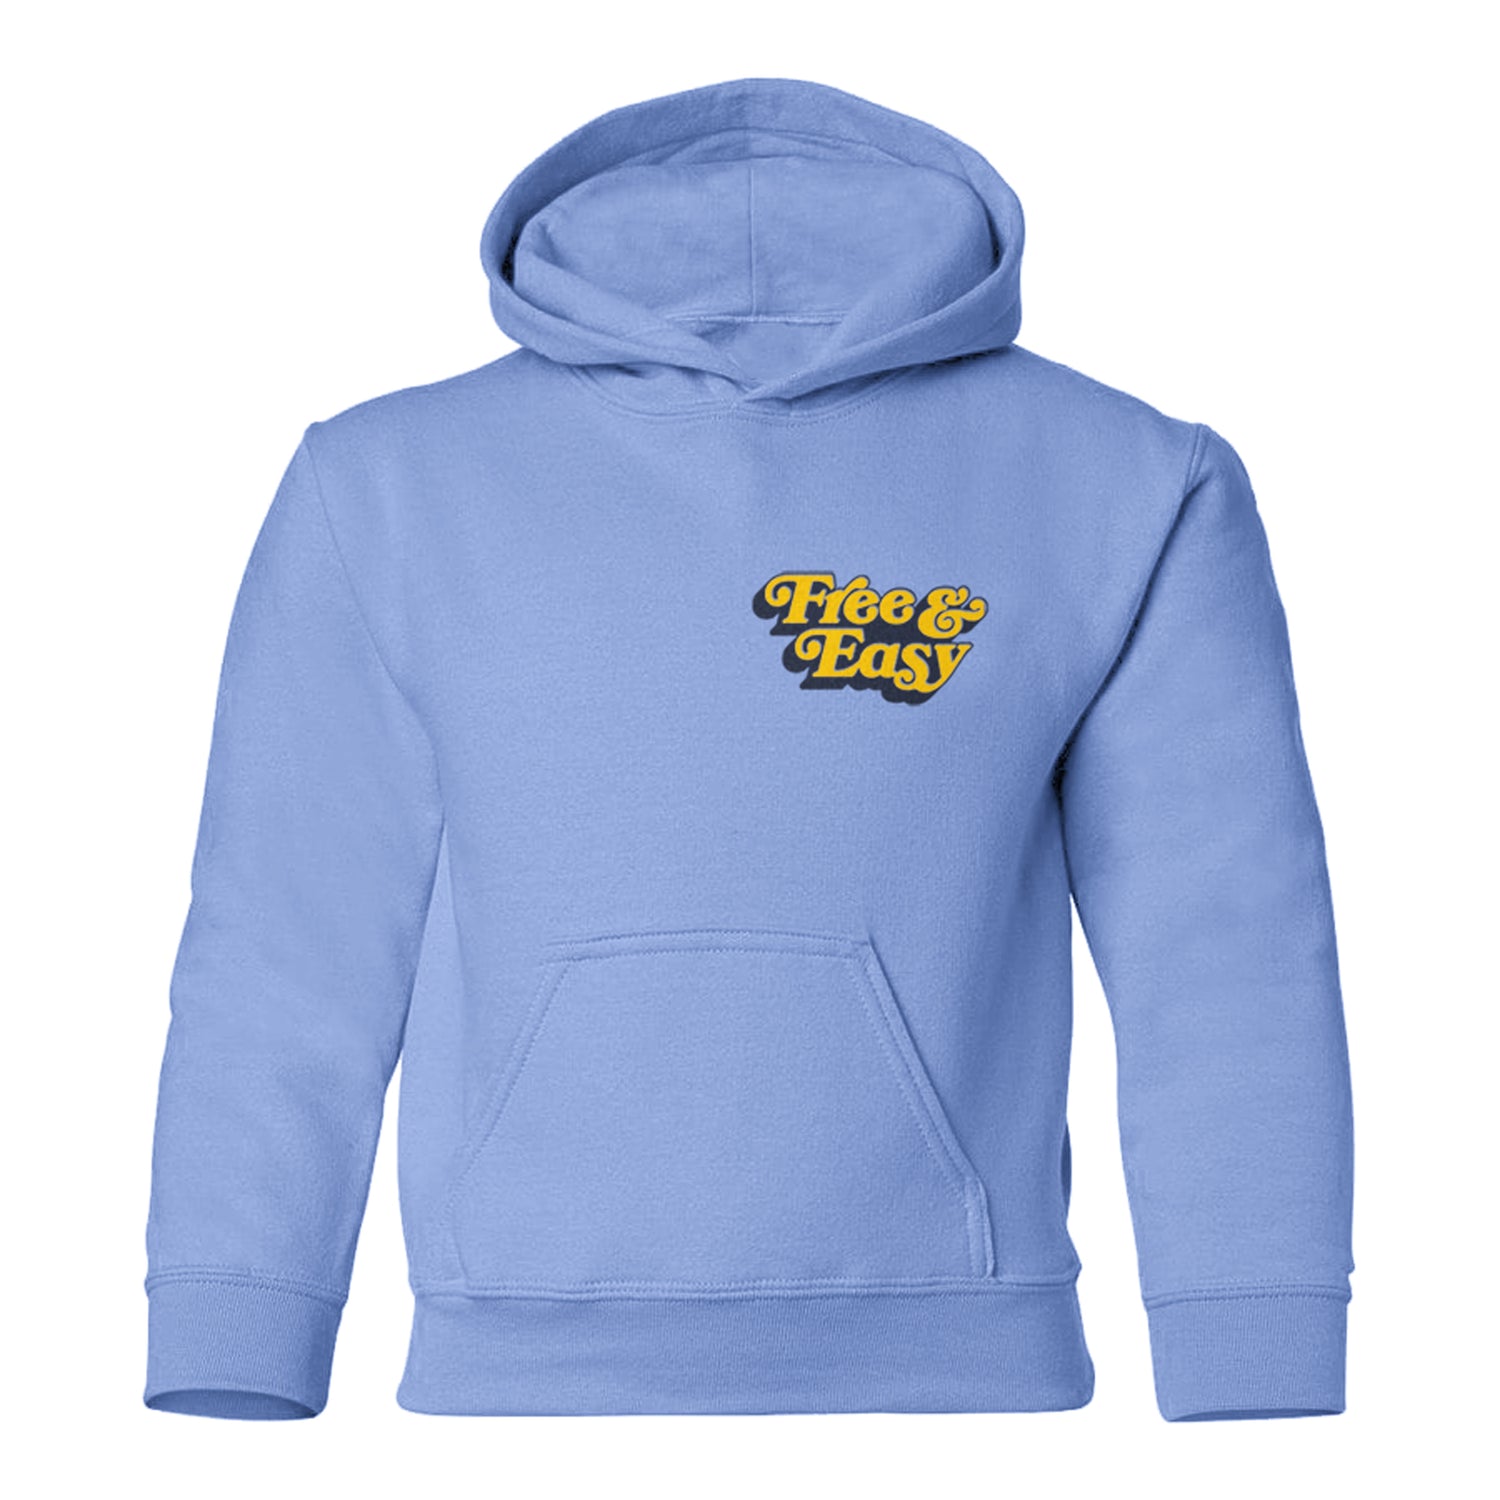 Be Happy Kids Hoodie in blue with yellow and navy Free & Easy left chest print on front on white background - Free & Easy